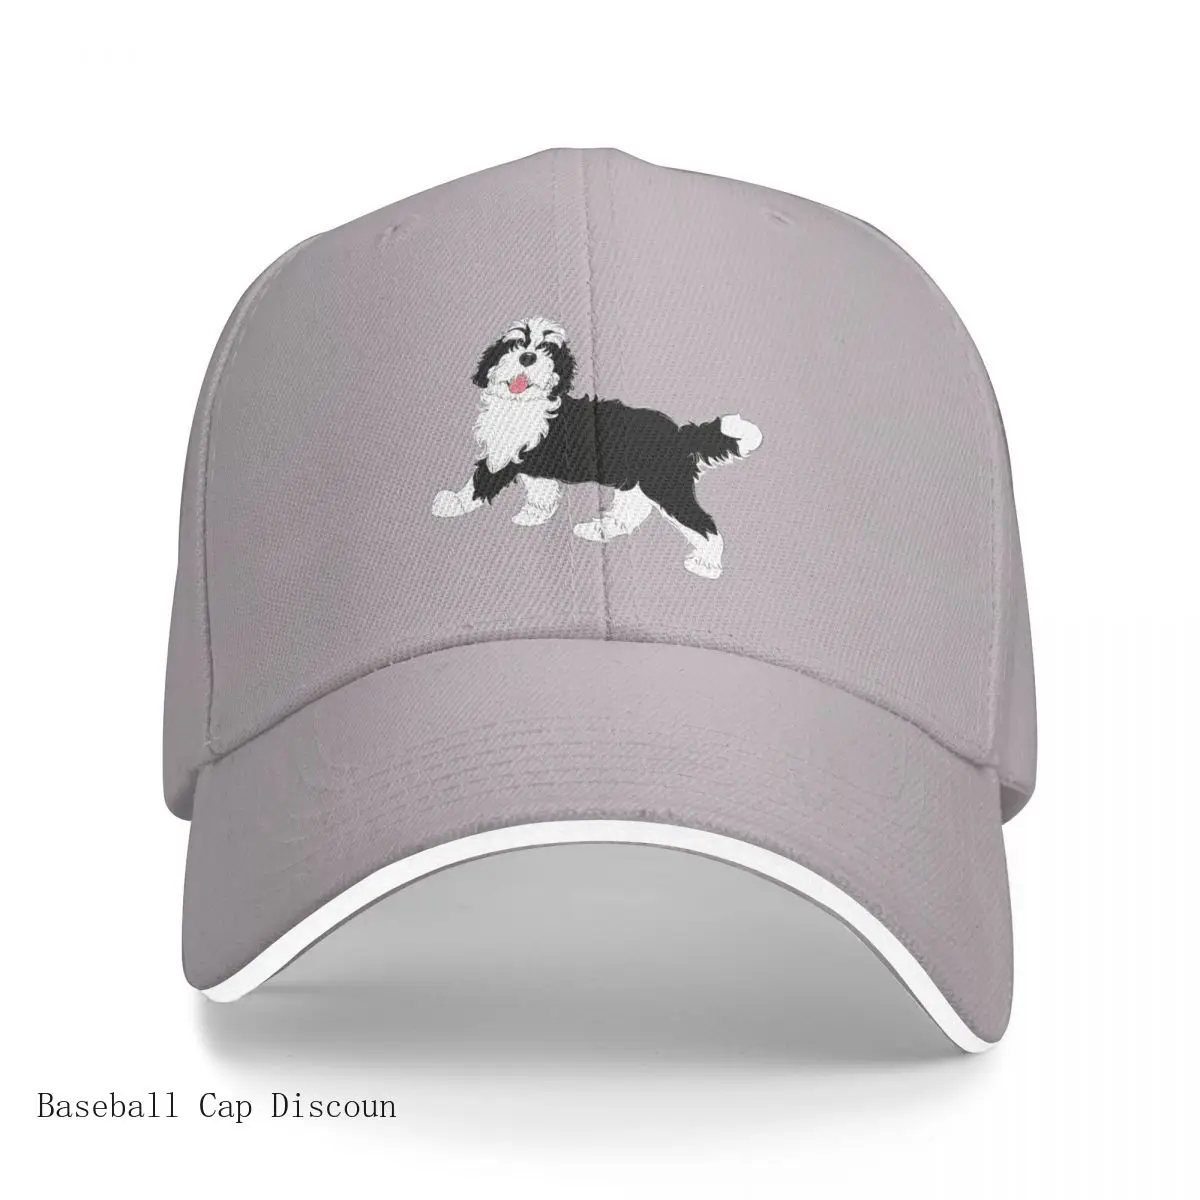 

Black and White Bernedoodle Cap Baseball Cap sunhat hat luxury brand Rugby hat for women Men's Hot